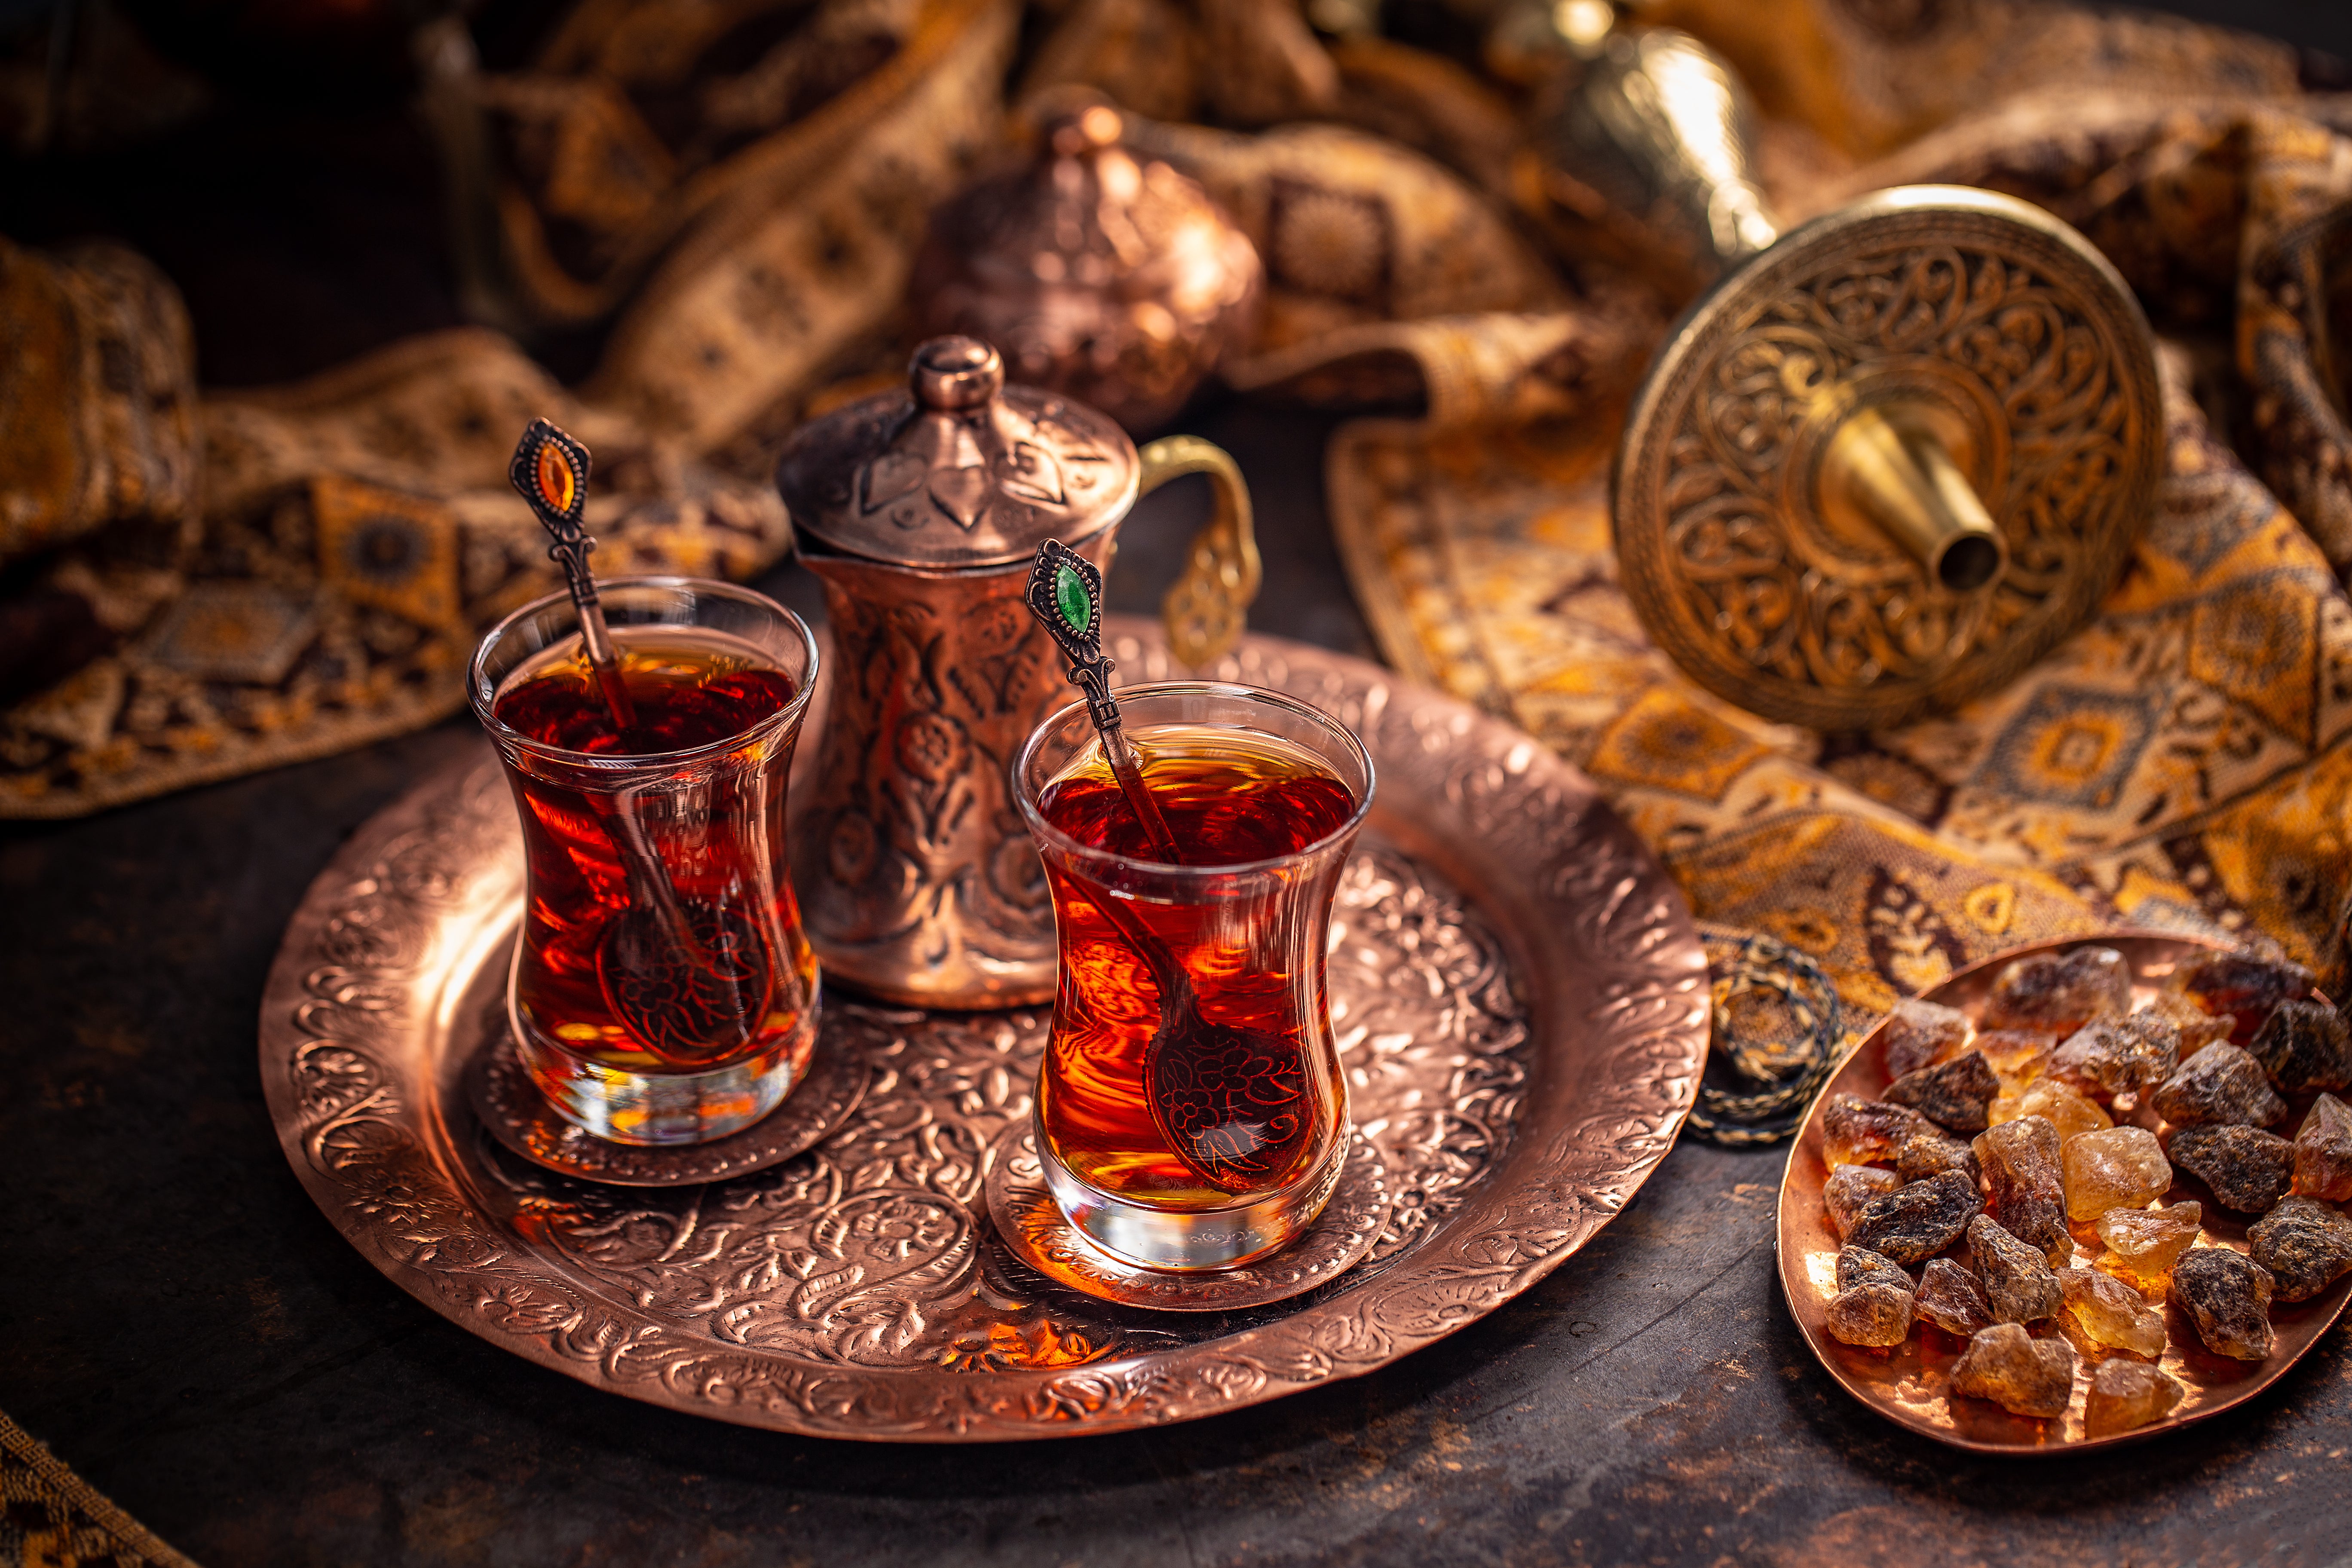 Where to Buy Turkish Tea in the USA?